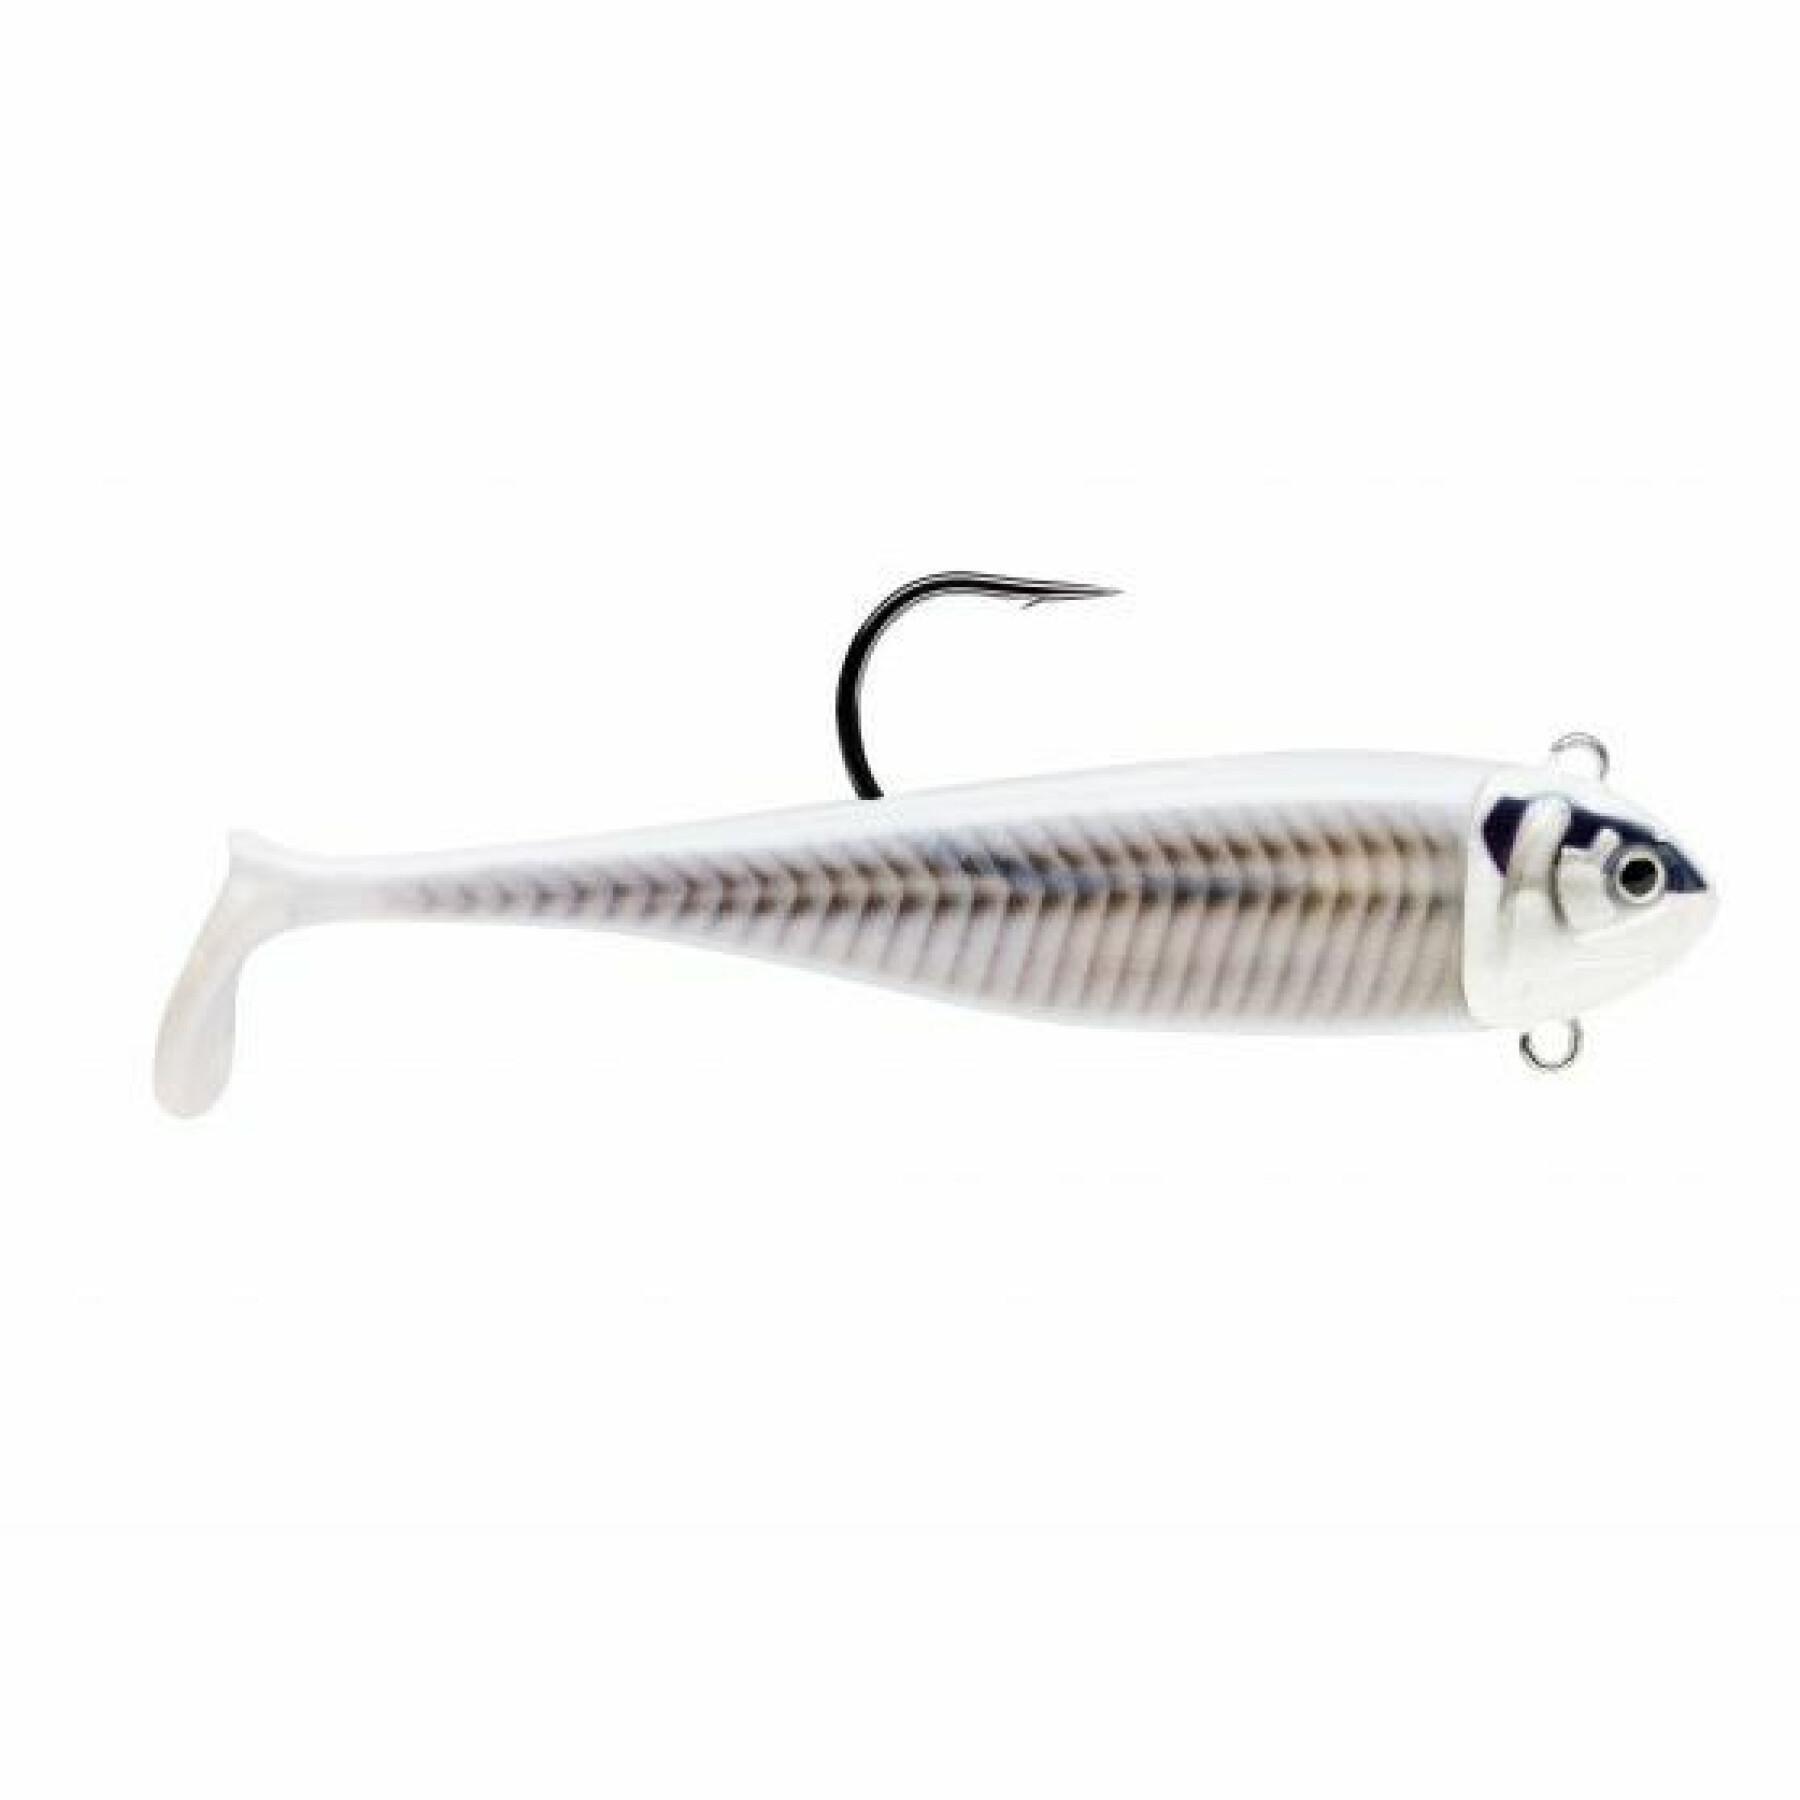 Soft lure Storm 360° gt coastal biscay deep minnow - Soft lures